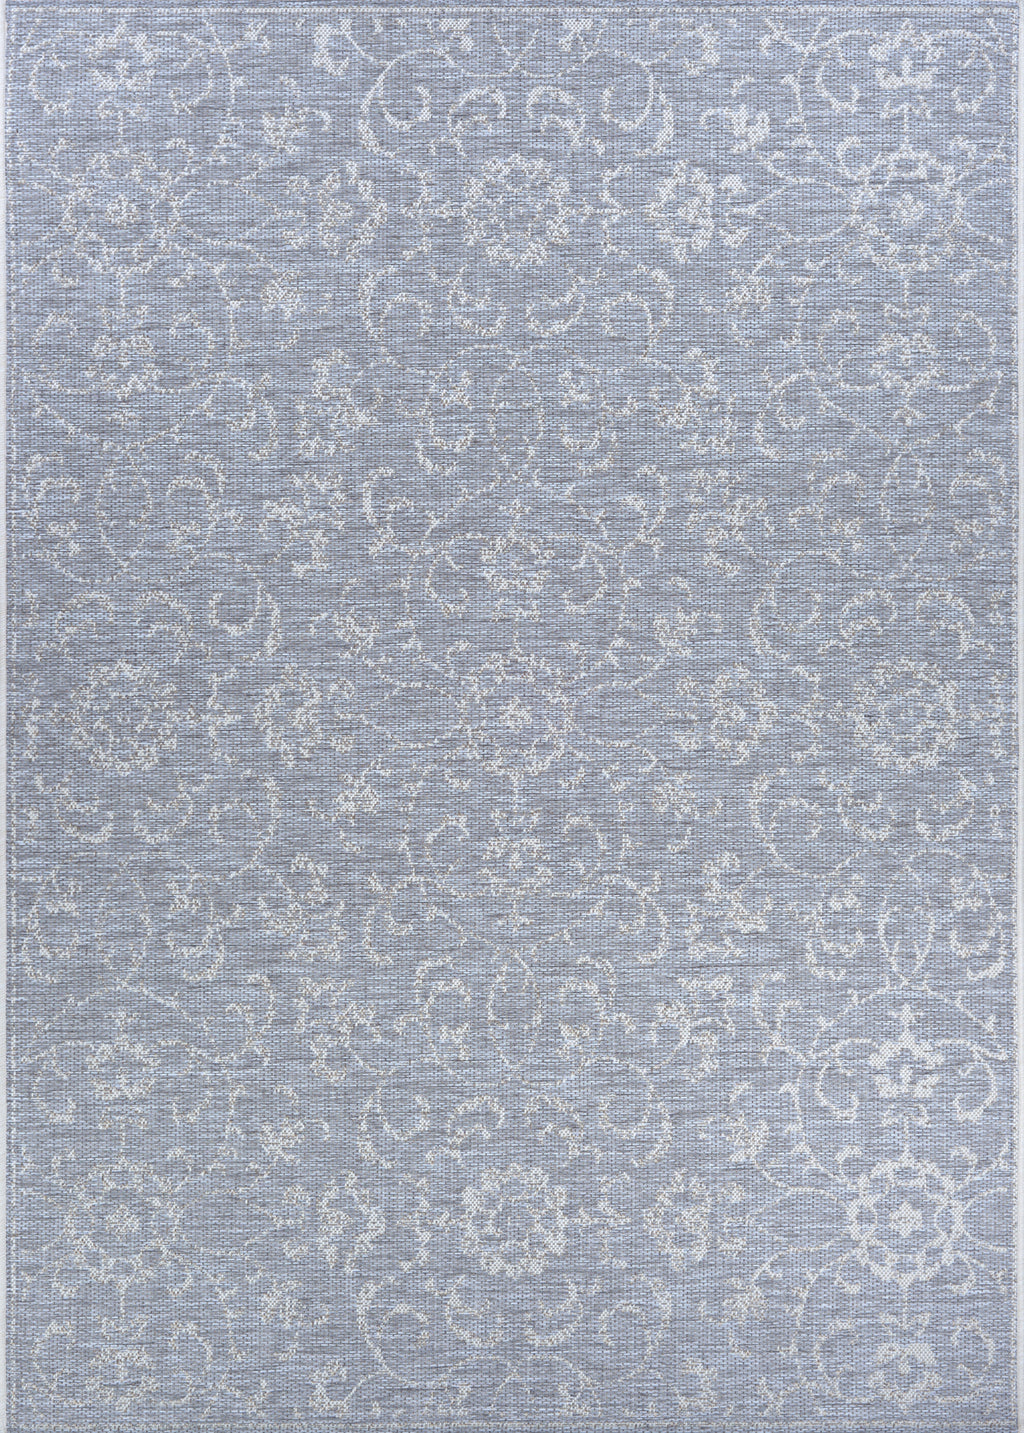 Couristan Monte Carlo Summer Vines Pewter/Ivory Area Rug main image